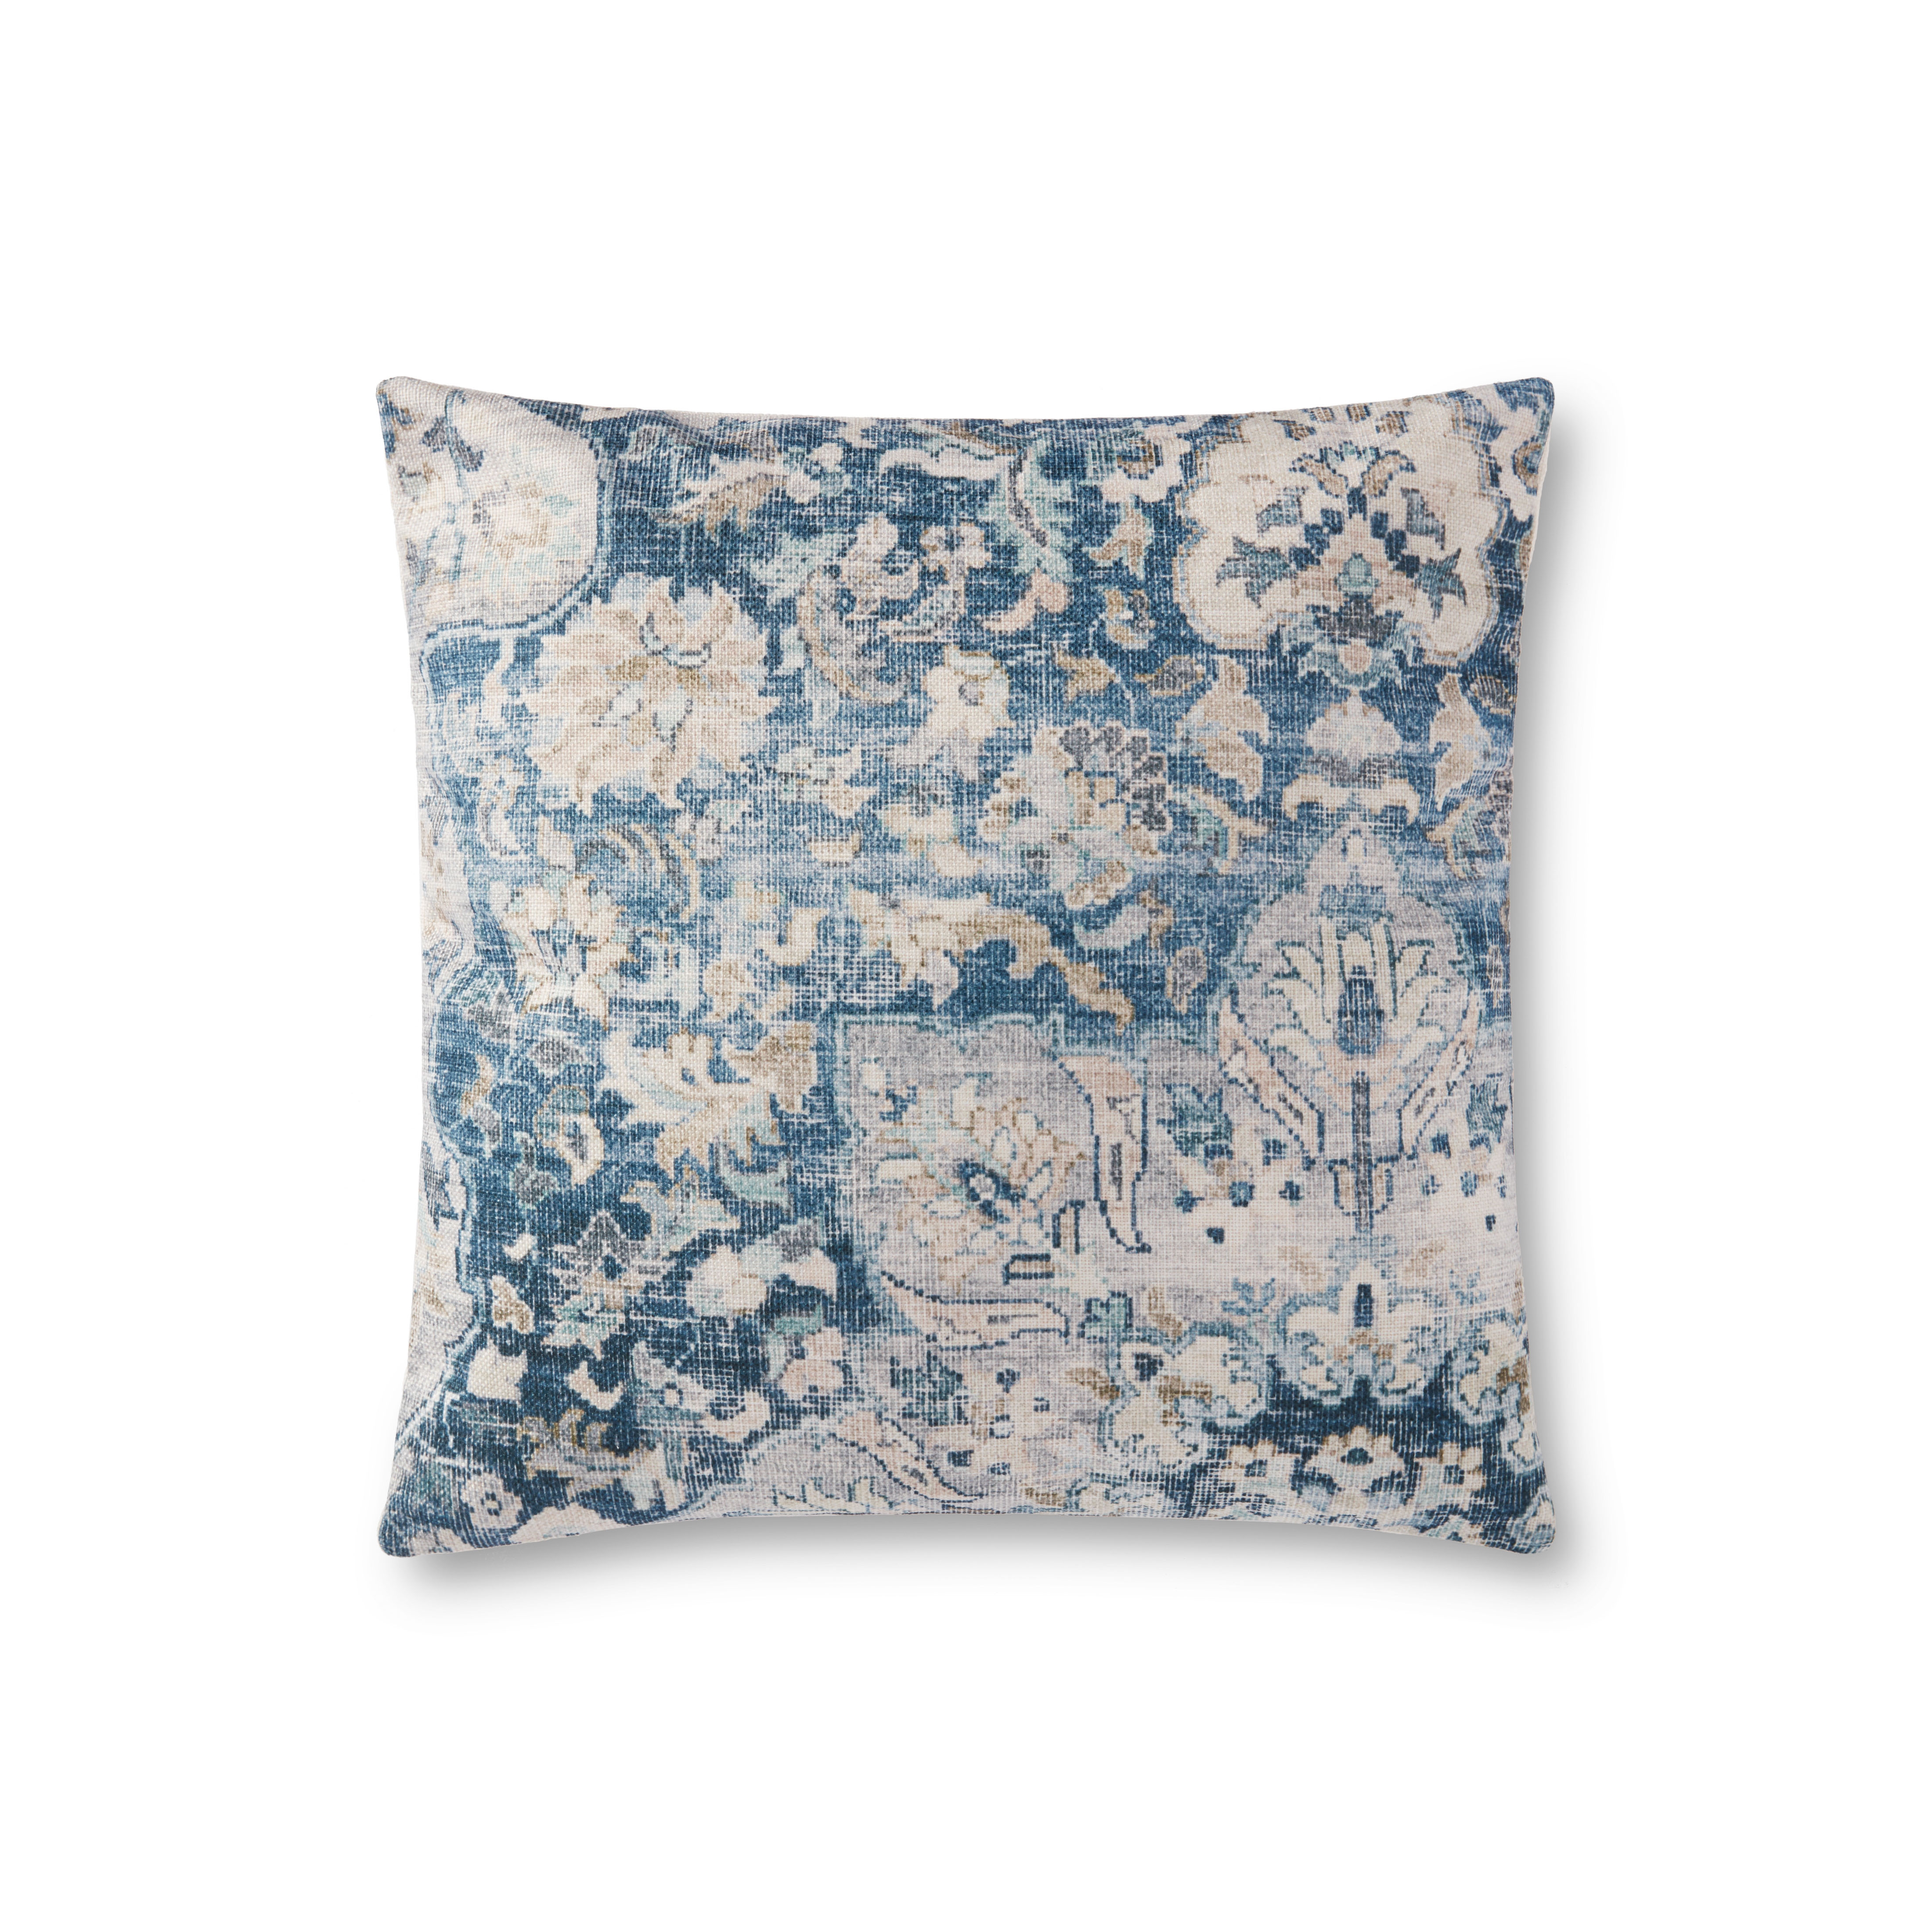 PILLOWS P0912 BLUE / MULTI 18" x 18" Cover Only - Image 0